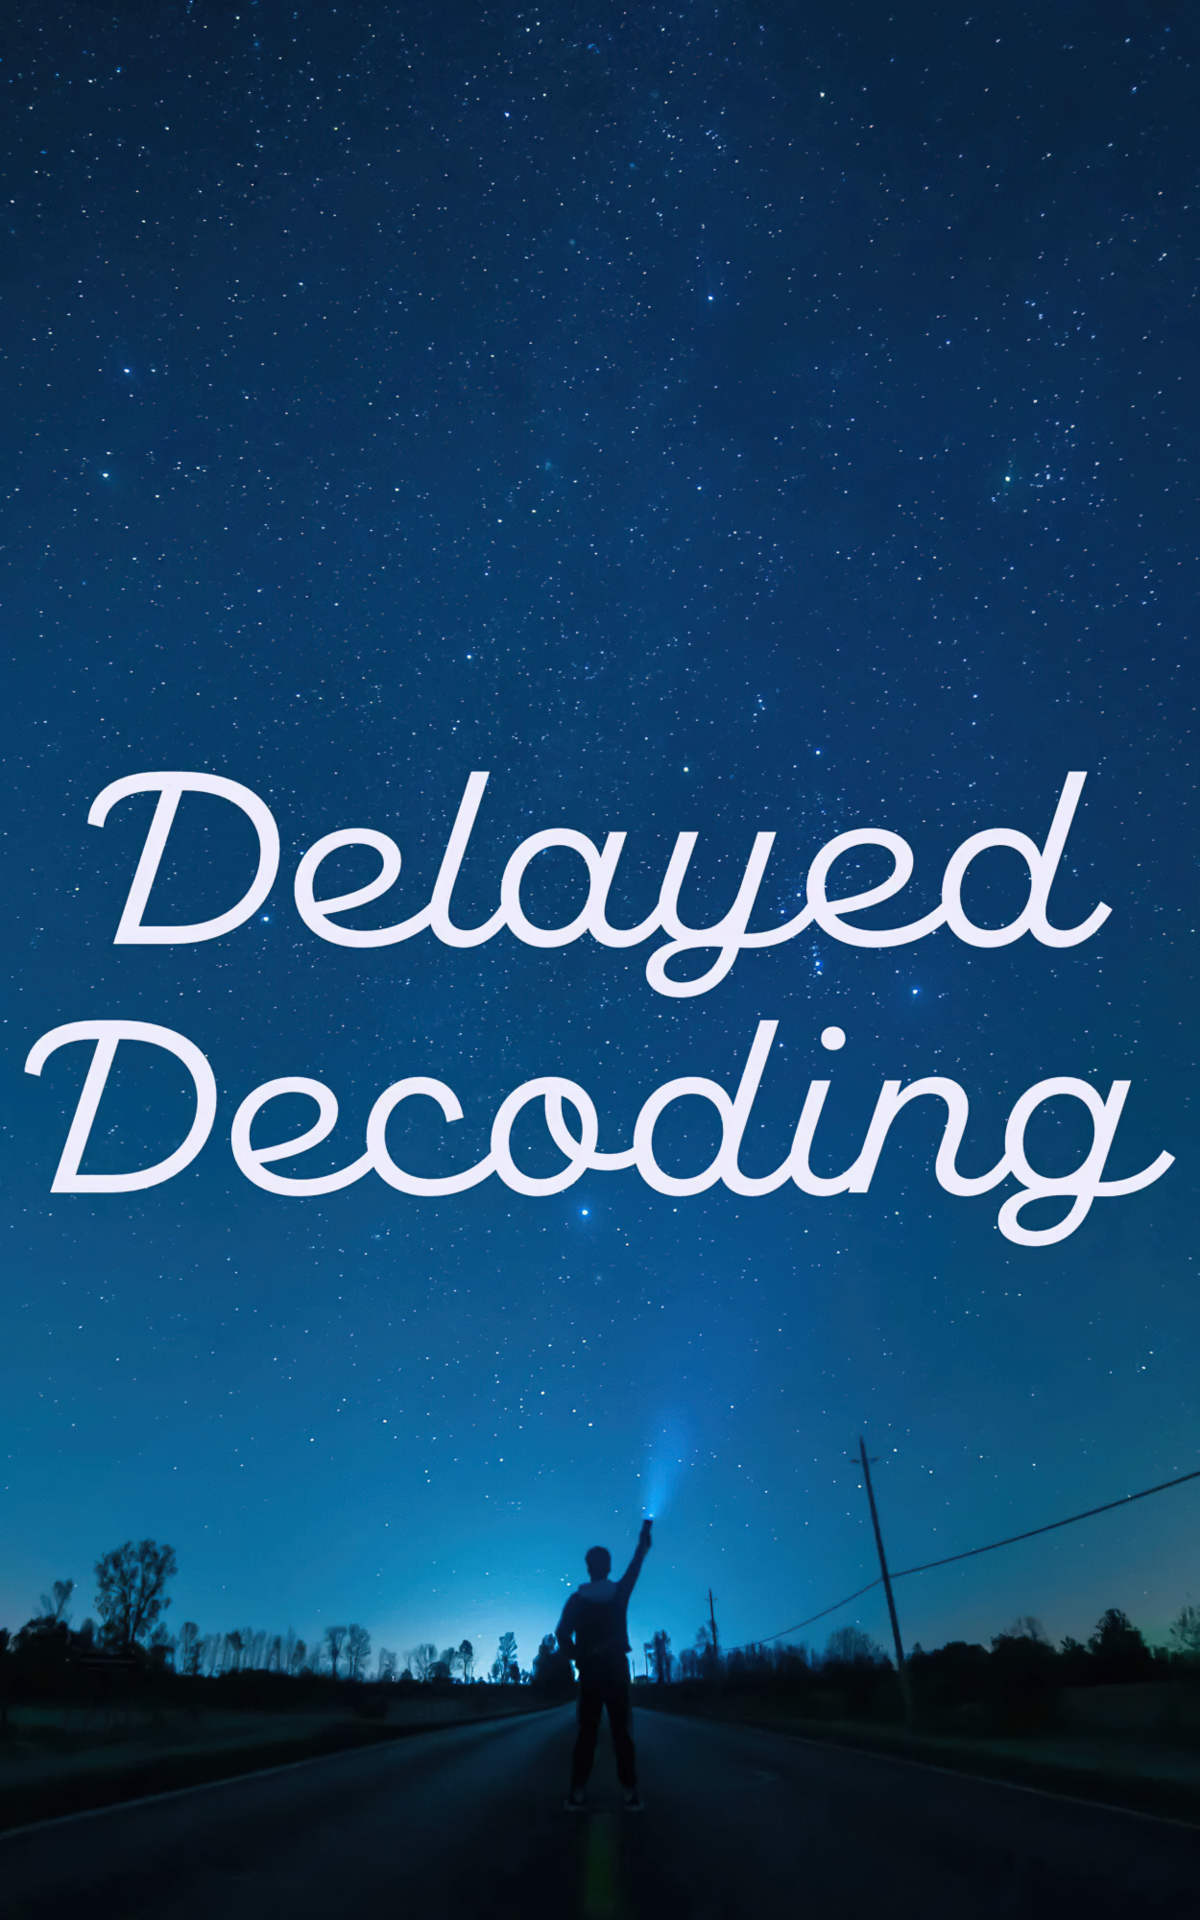 What is delayed decoding?